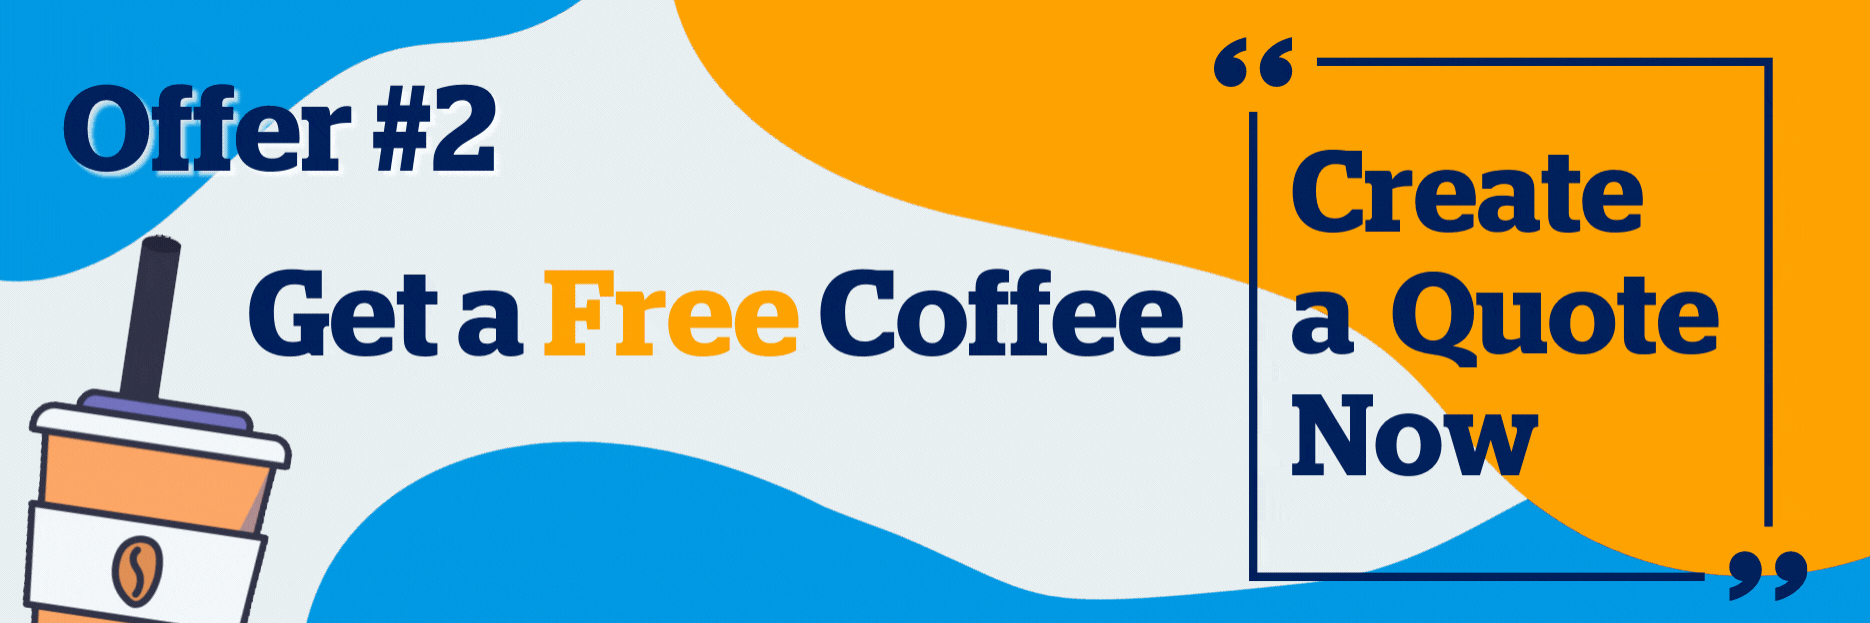 Get a free coffee 